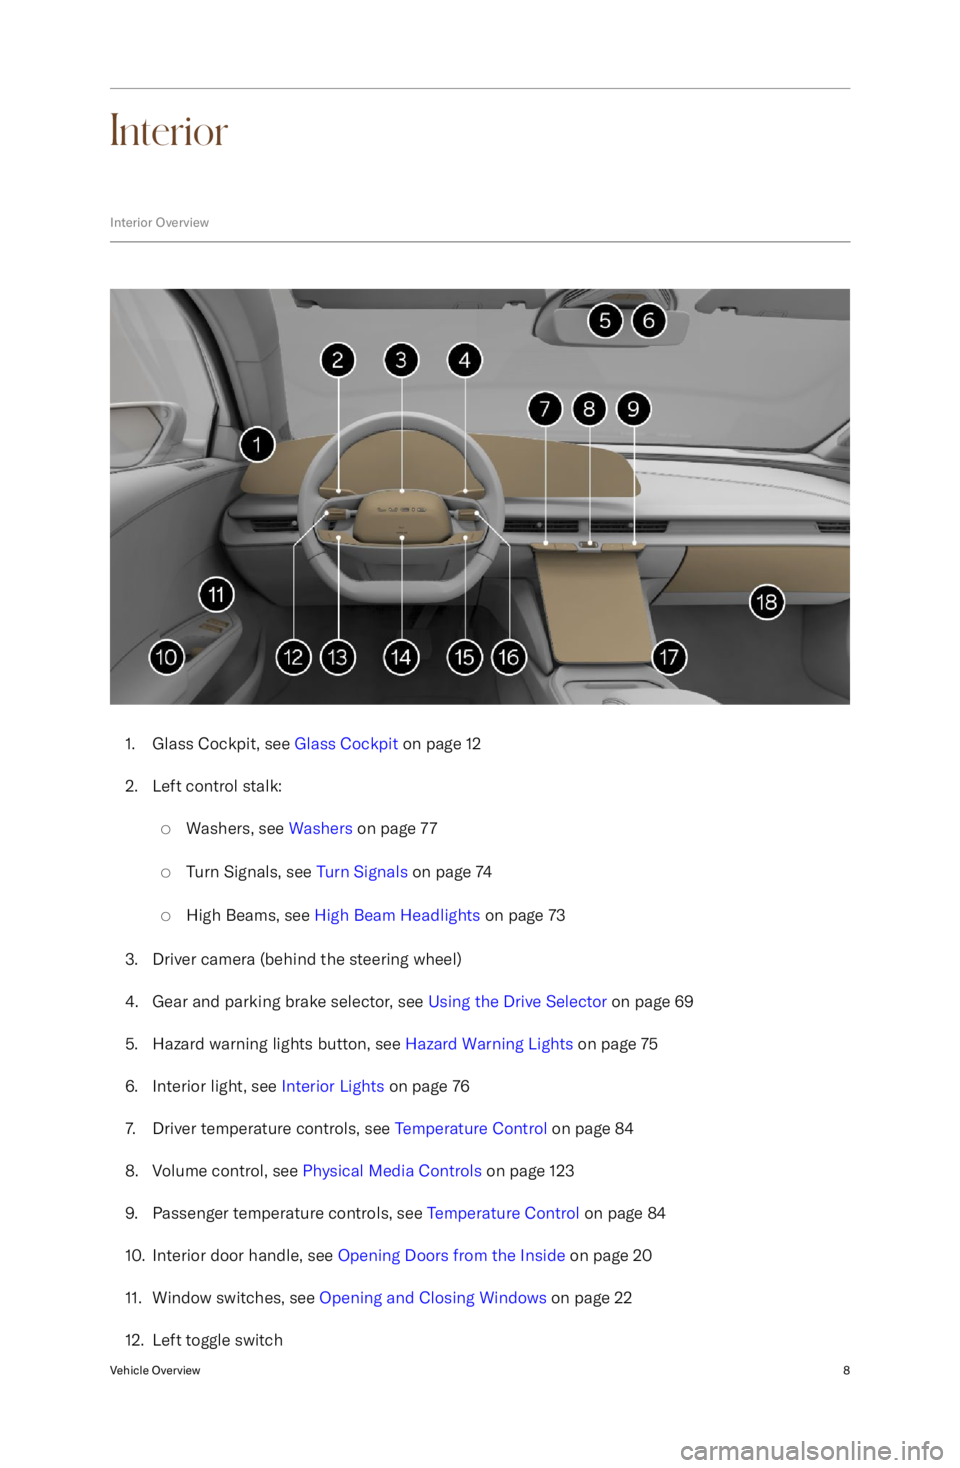 LUCID AIR 2022 Owners Manual Interior
Interior Overview
1. Glass Cockpit, see Glass Cockpit on page 12
2. Left control stalk: 